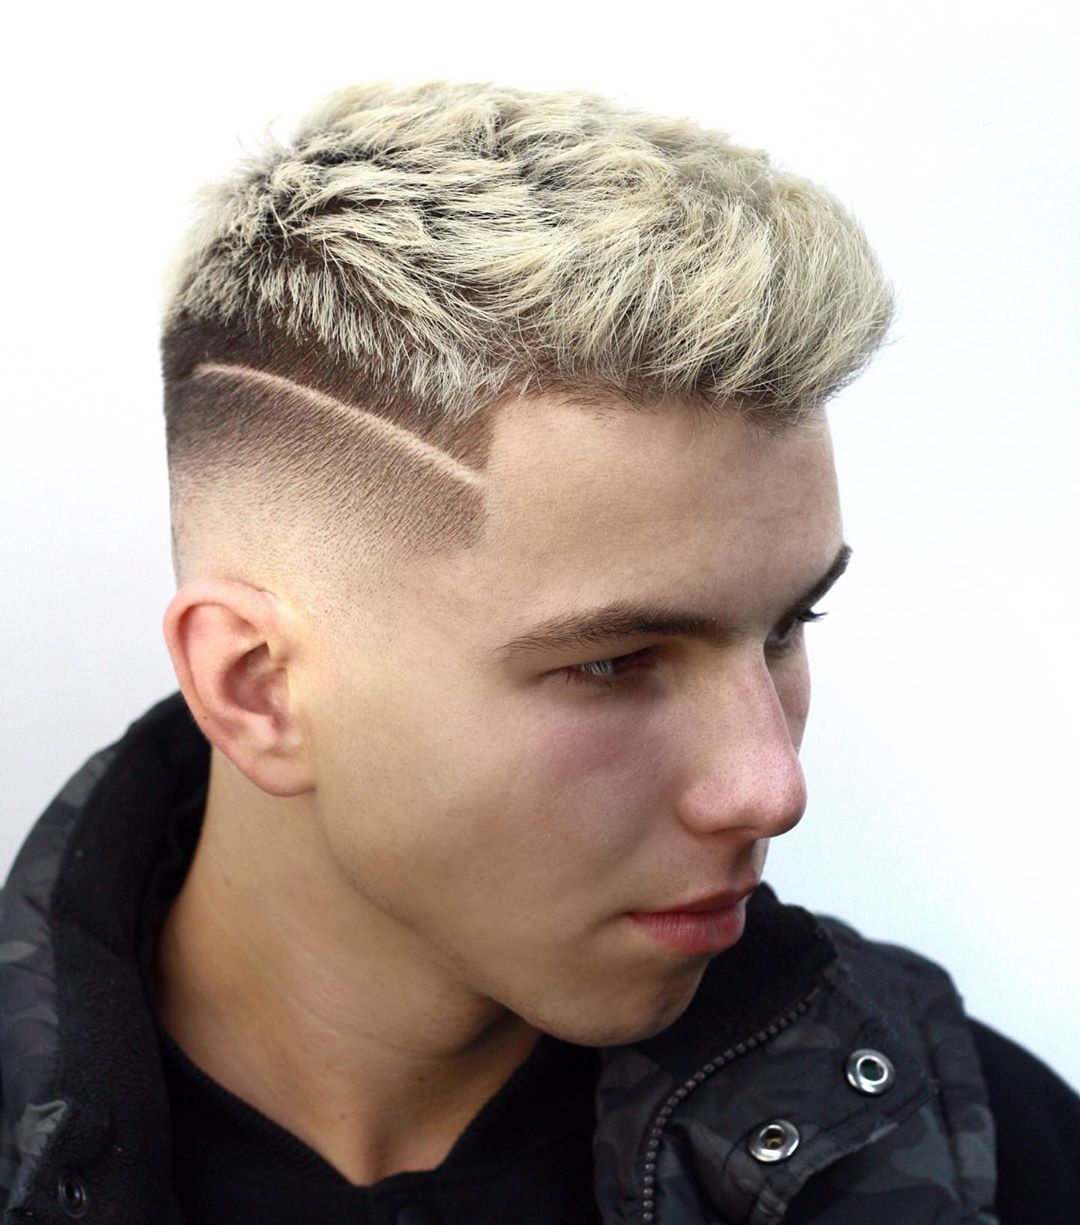 20+ Cool Haircuts For Men (2021 Trends)